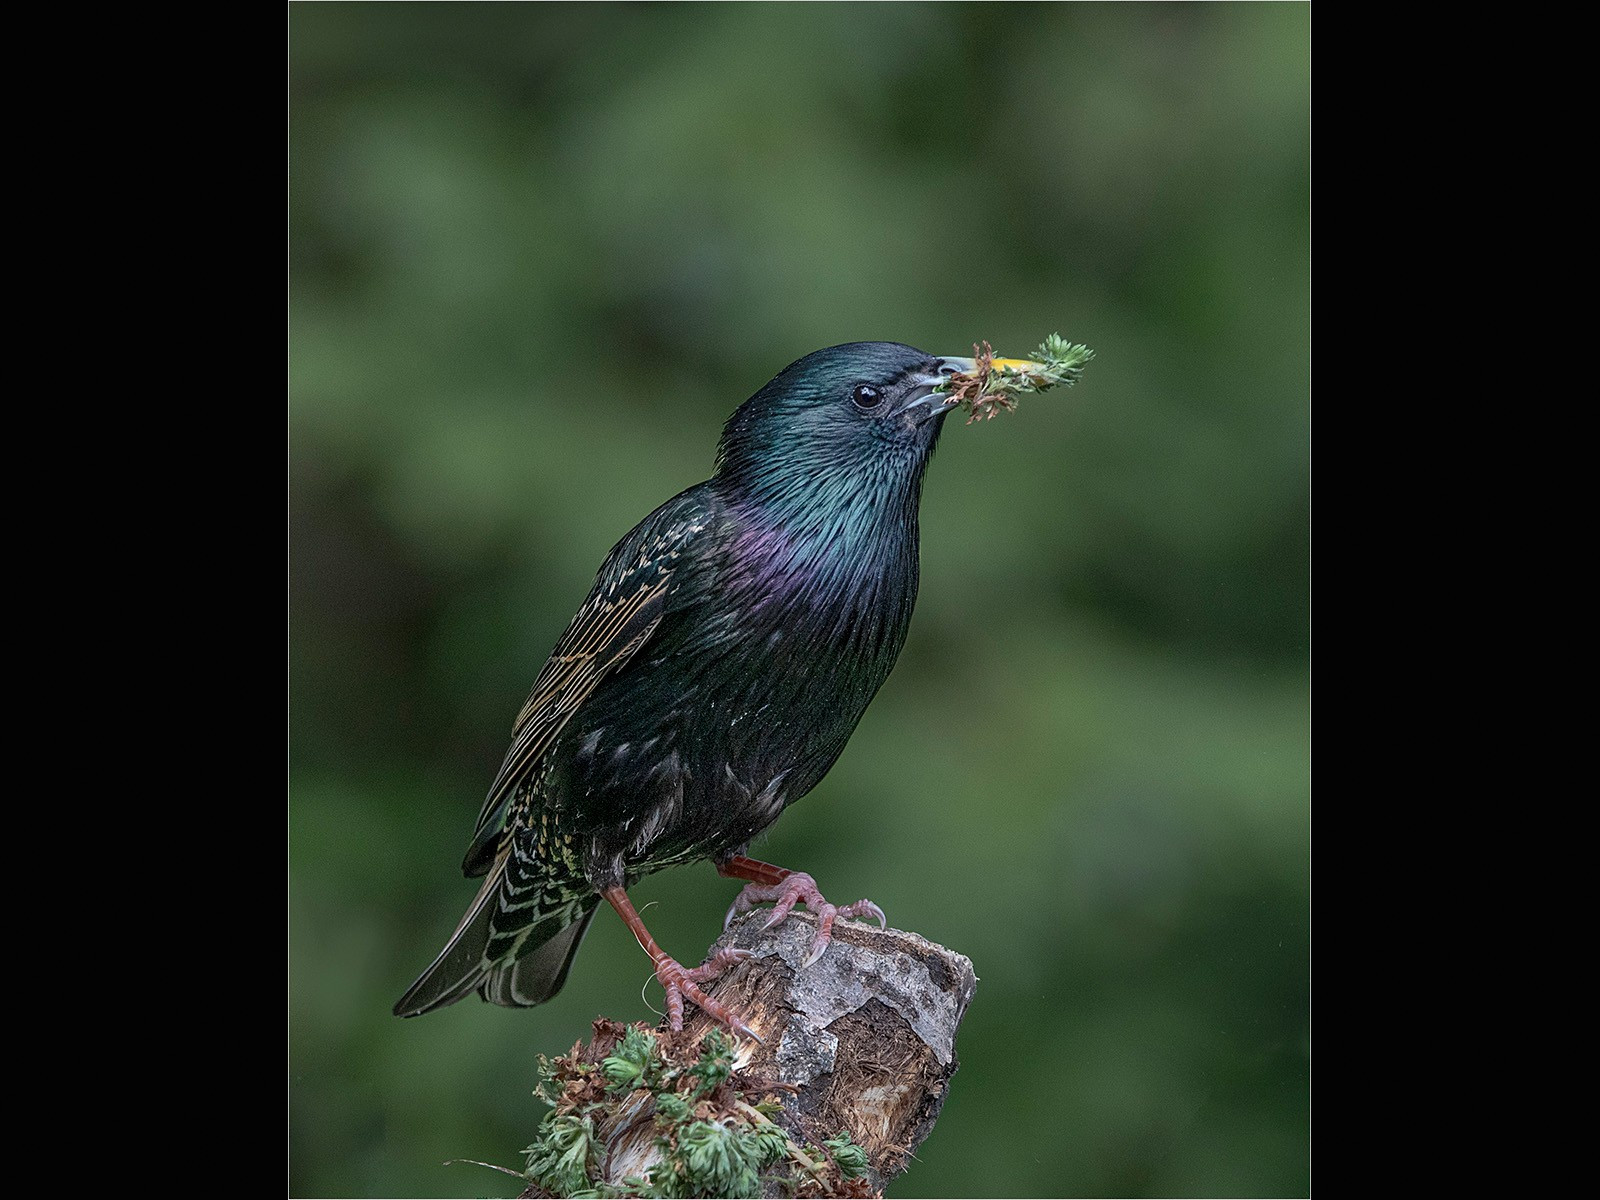 24. Starling with Nesting Material